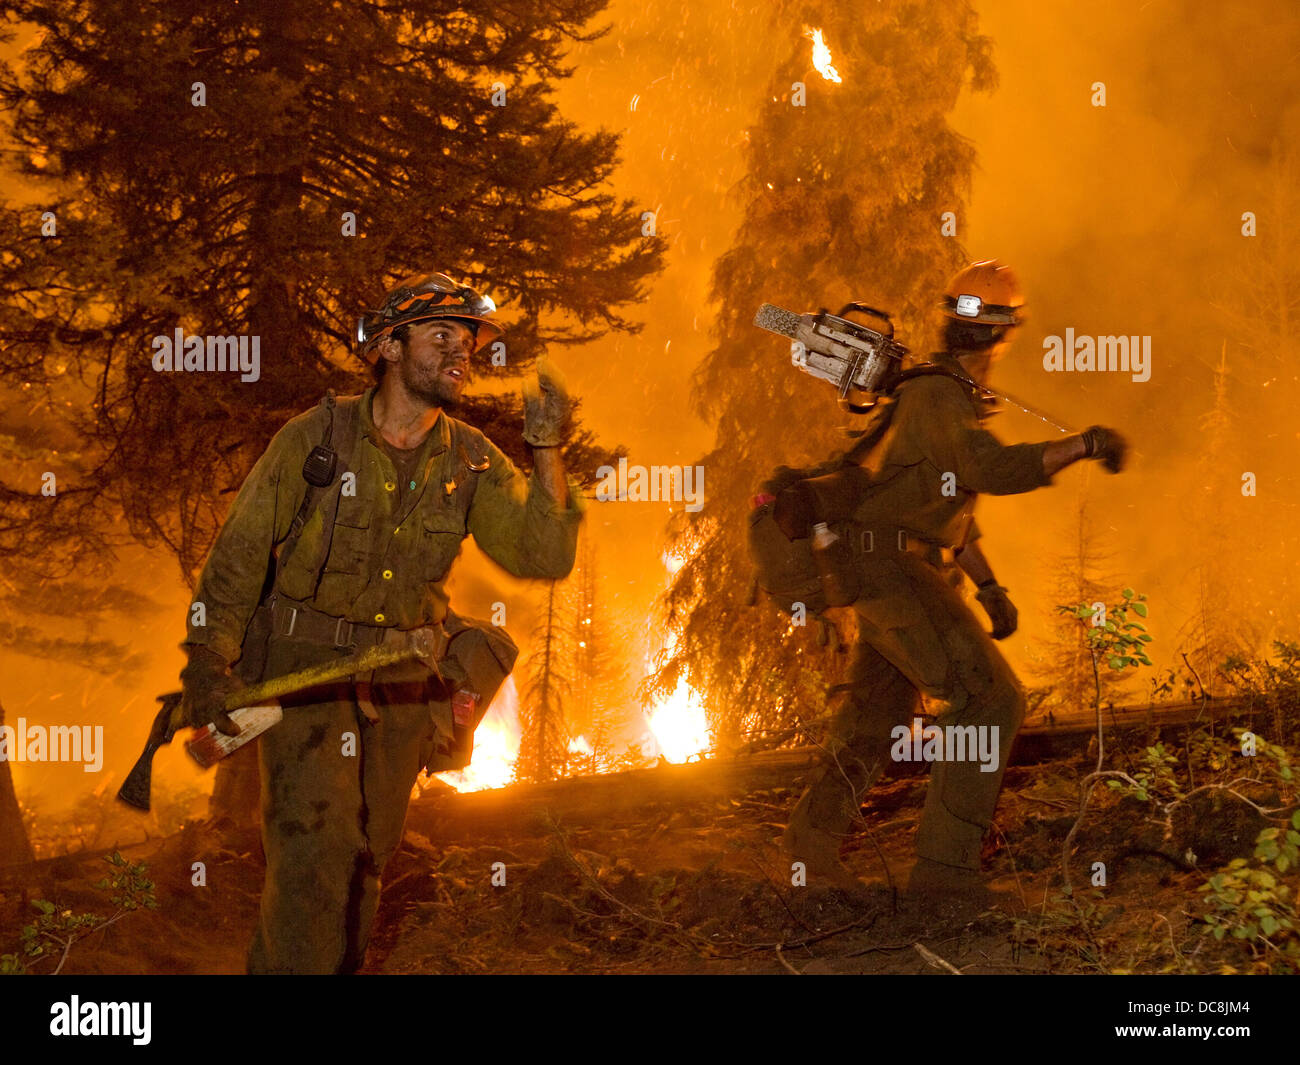 Two members of the Idaho City Hotshots work on the Springs Fire on the Boise National Forest August 13, 2012 near Boise, ID. Hotshot crews have been extensively trained to fight fires in remote areas with little or no logistical support in the most demanding conditions. Stock Photo